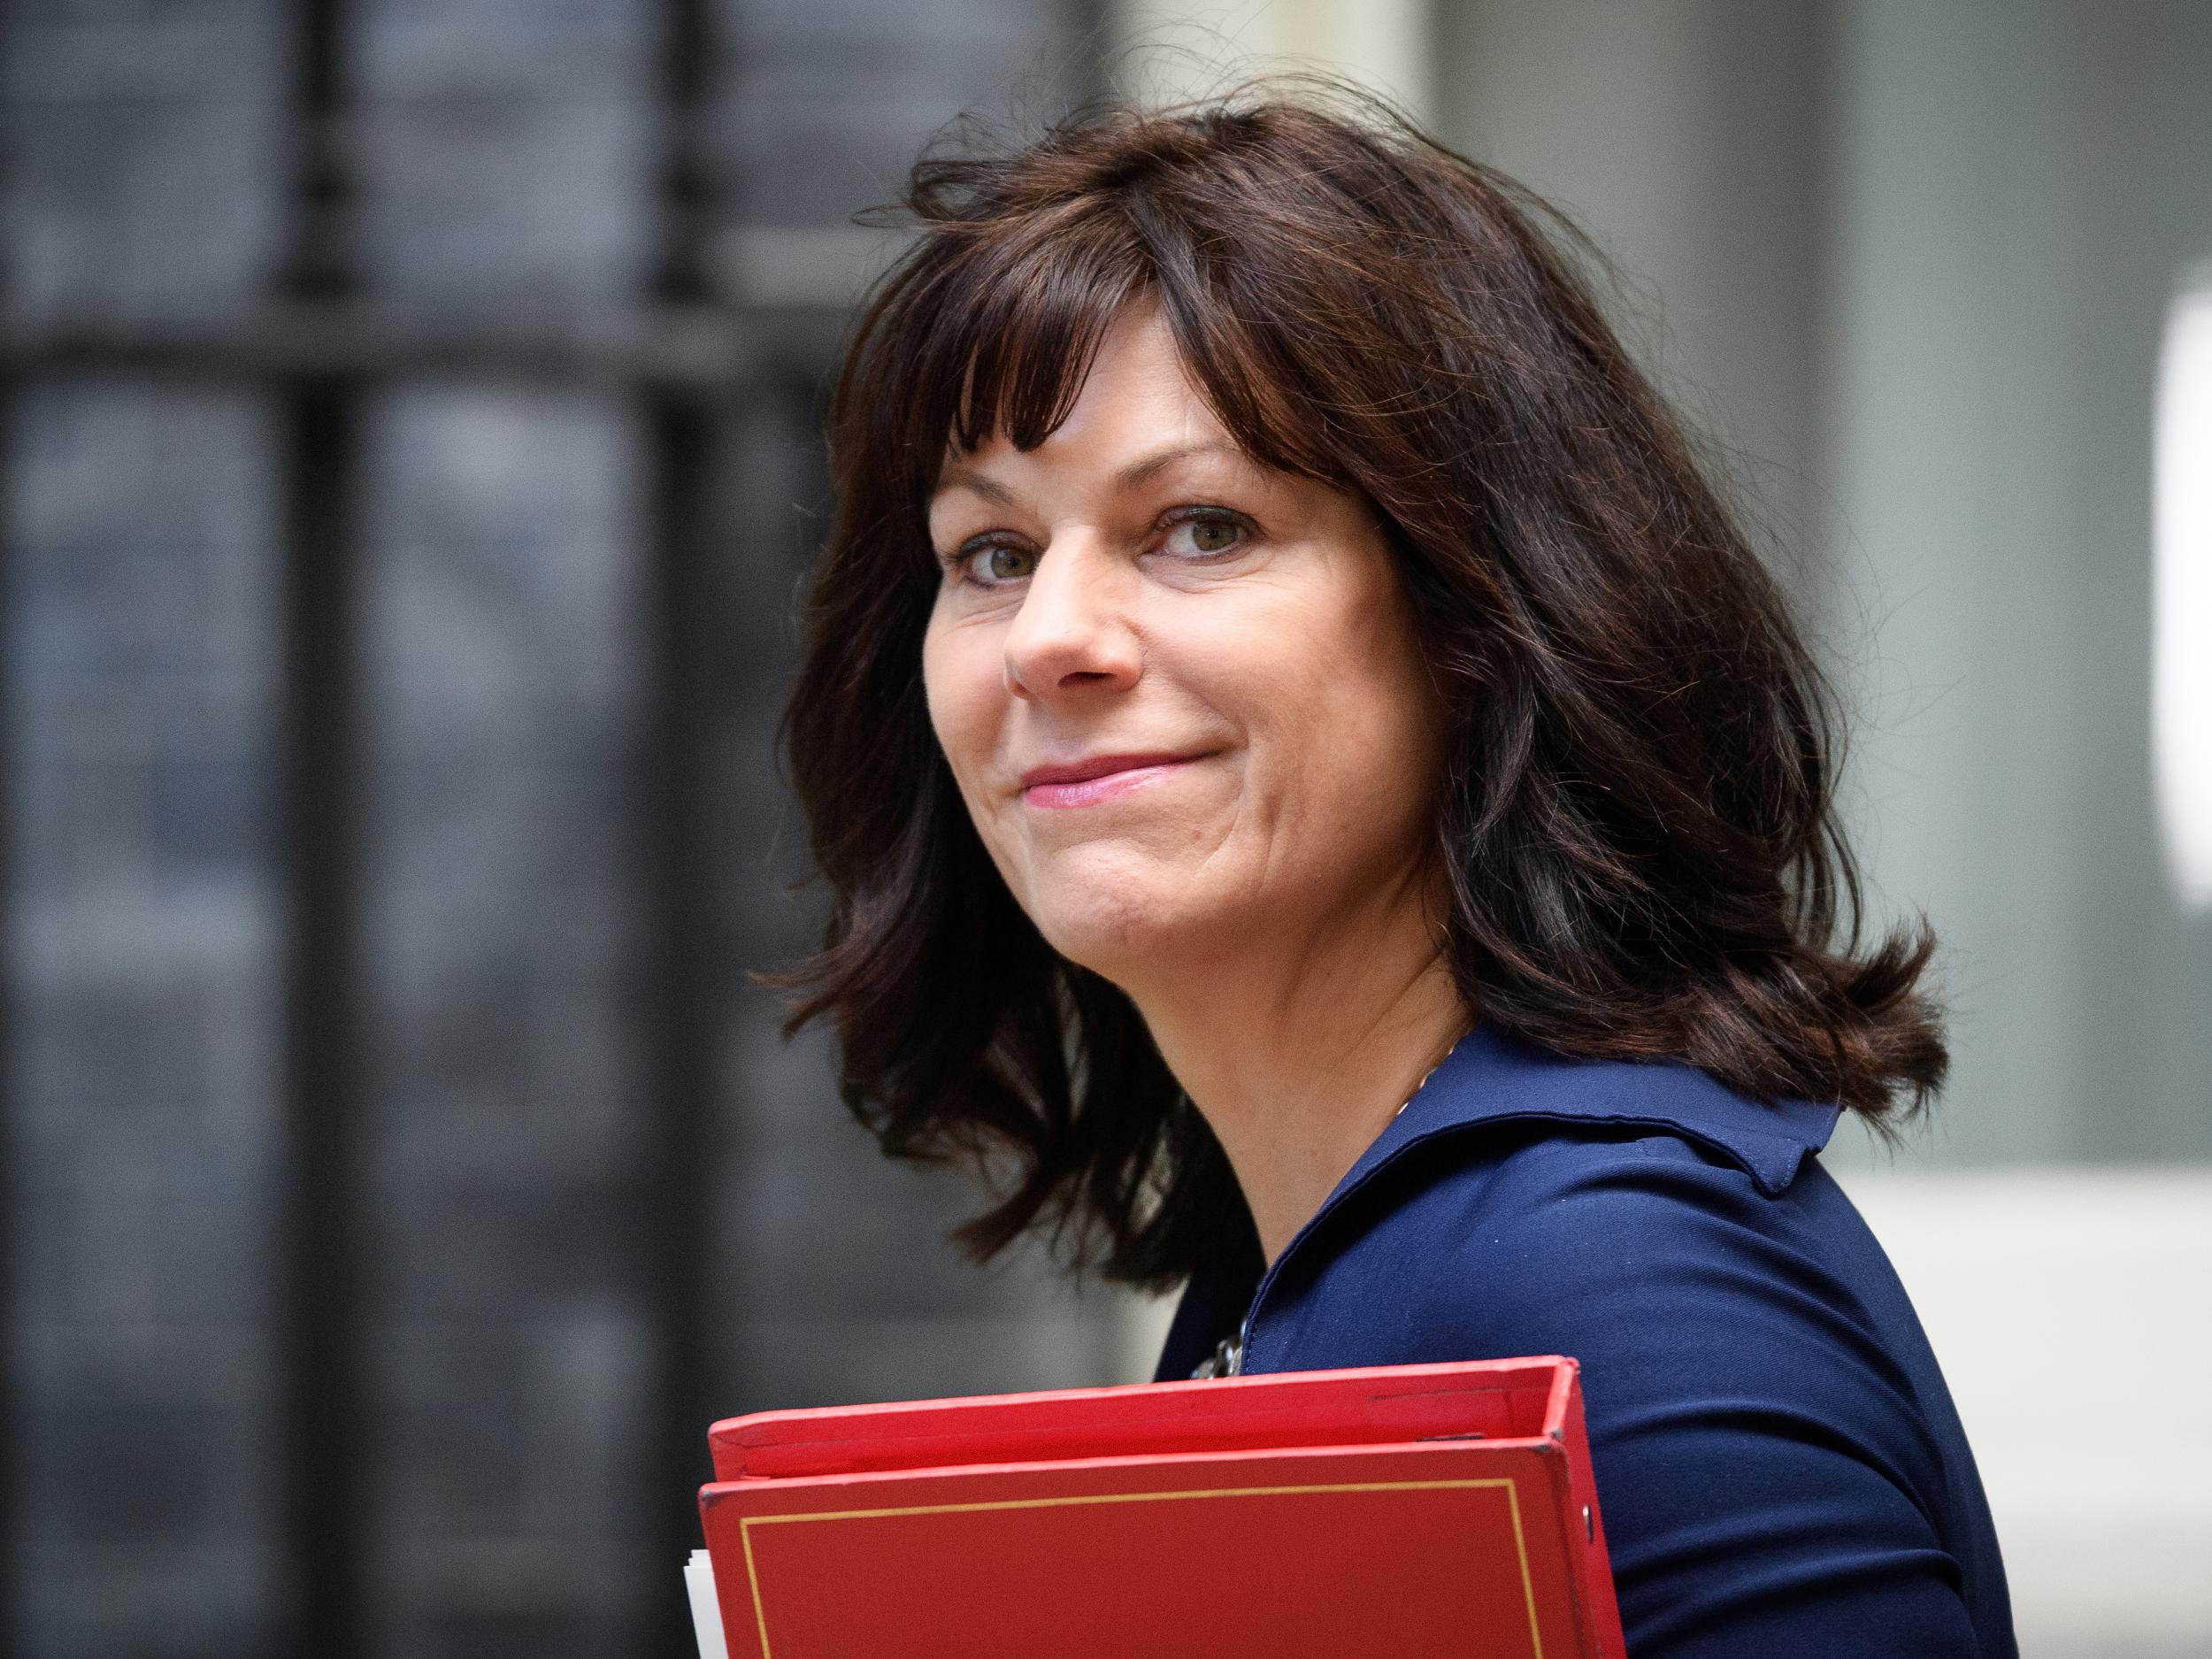 Claire Perry has recently stated that shale gas from fracking will help avoid reliance on Russian supplies